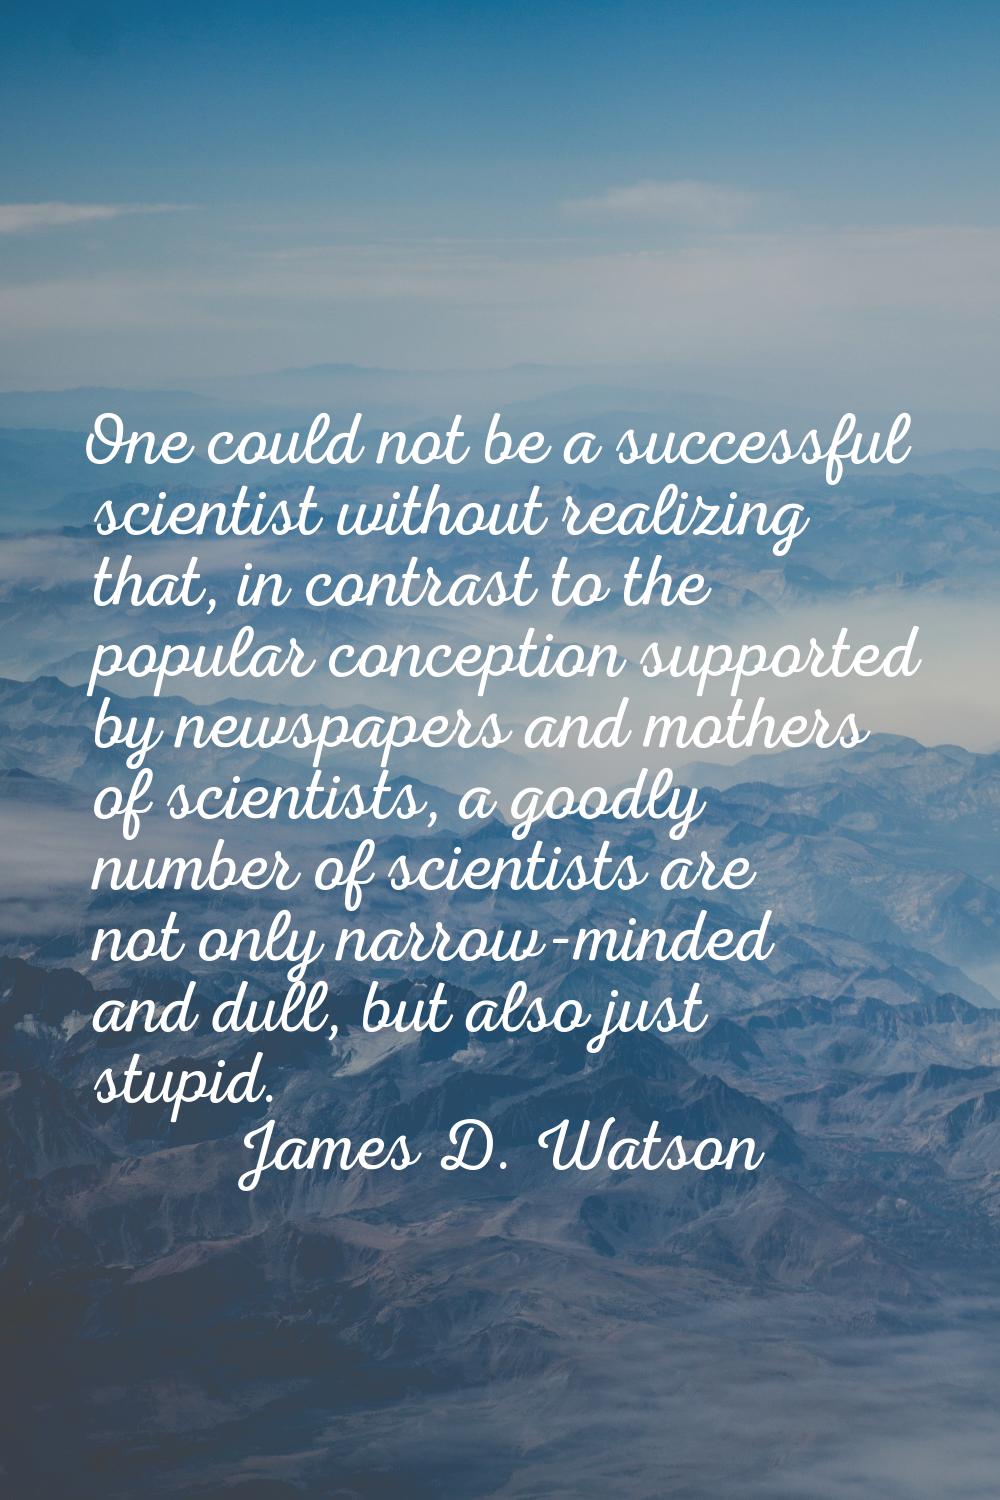 One could not be a successful scientist without realizing that, in contrast to the popular concepti